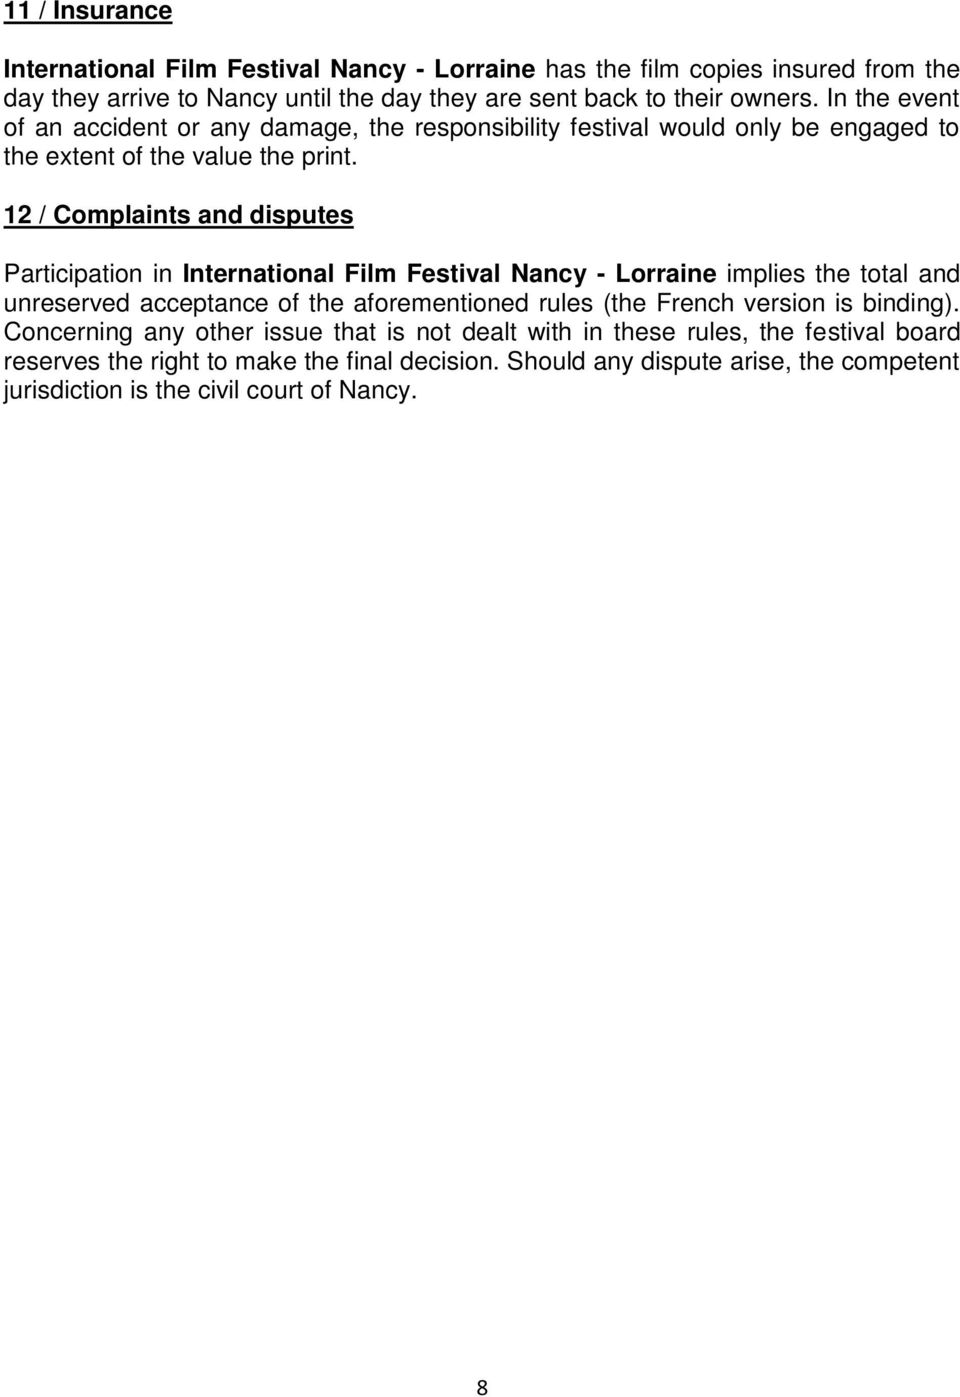 12 / Complaints and disputes Participation in International Film Festival Nancy - Lorraine implies the total and unreserved acceptance of the aforementioned rules (the French